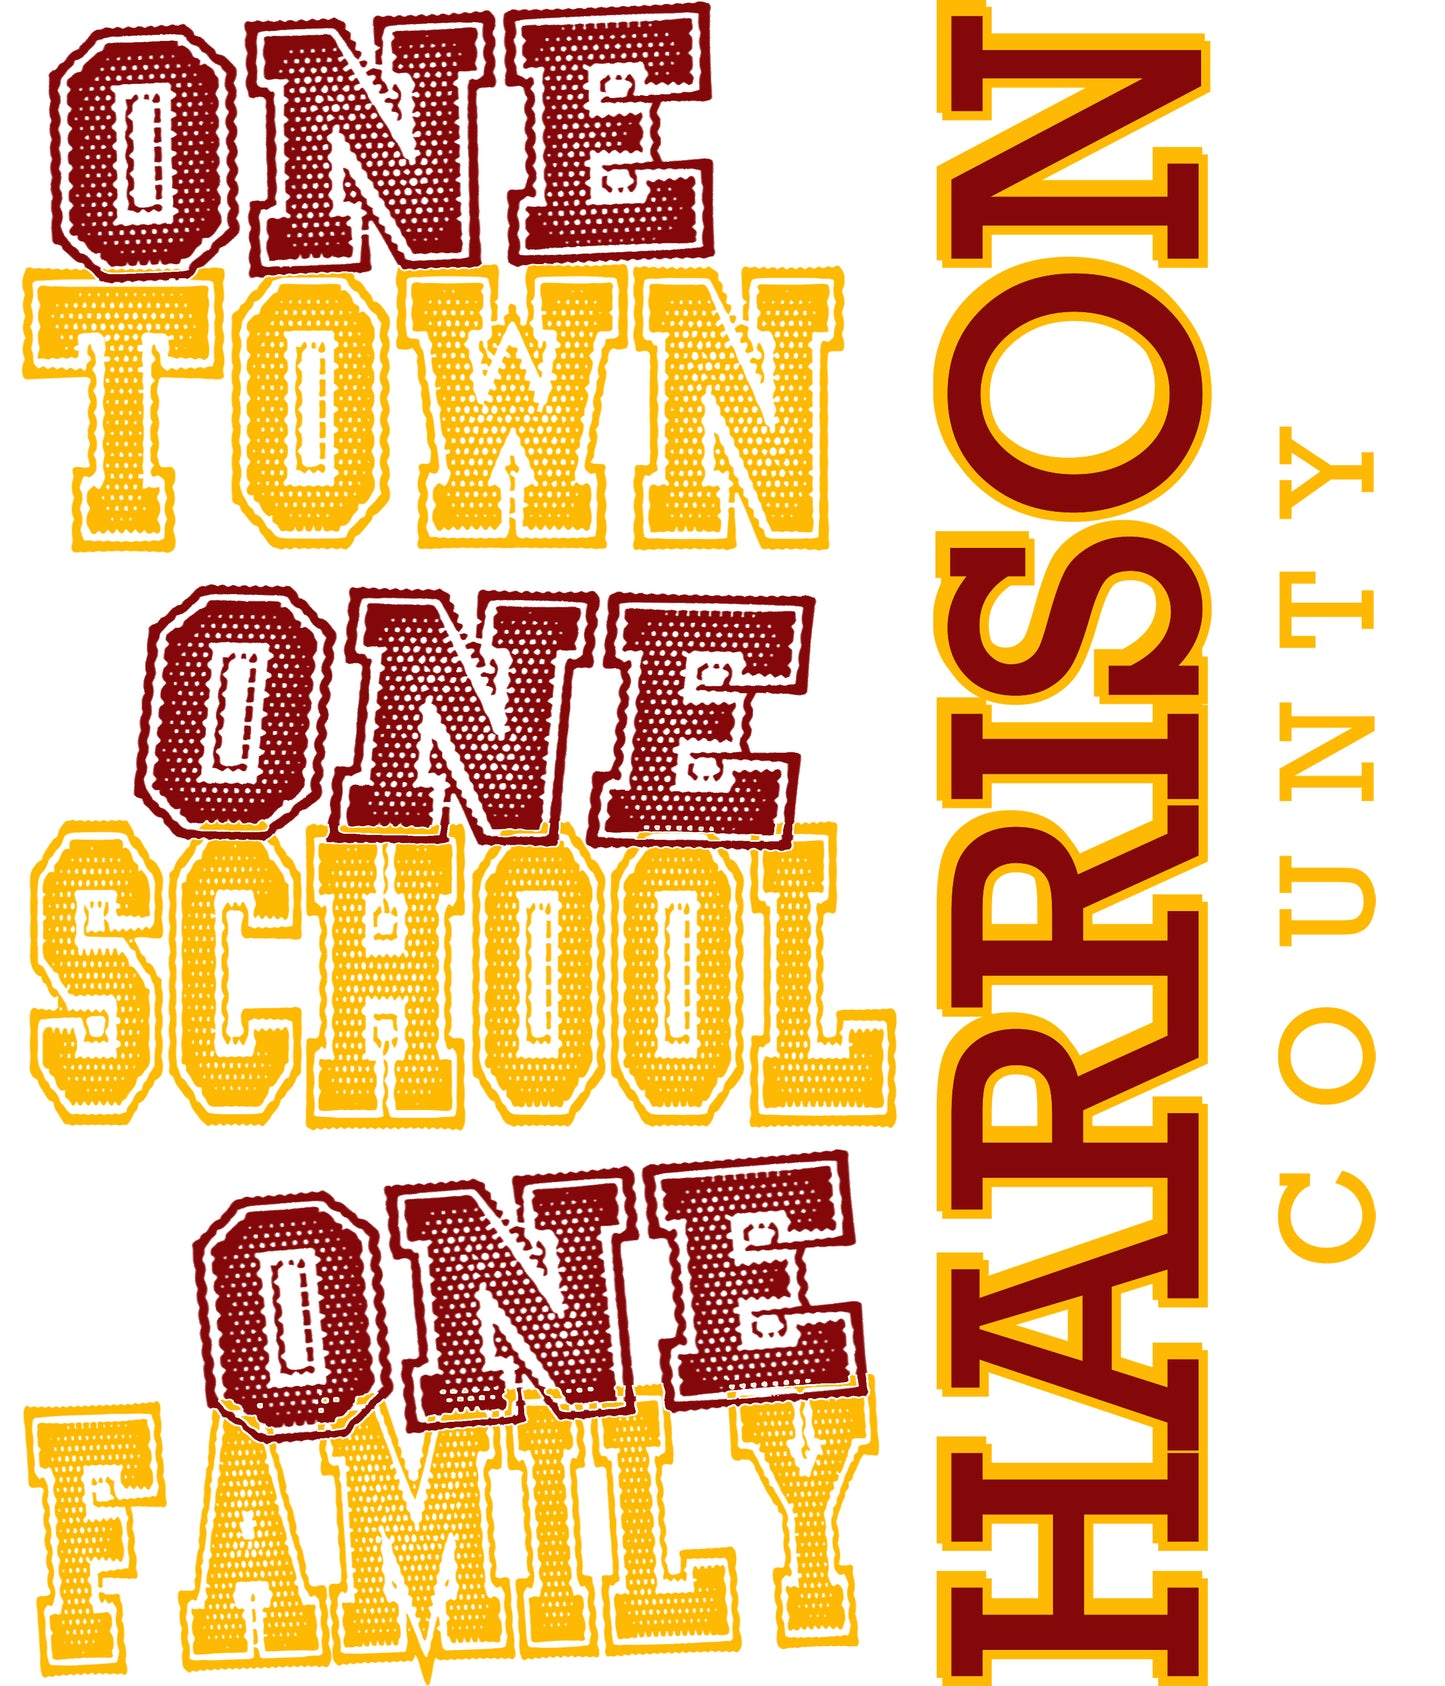 One Town, One School